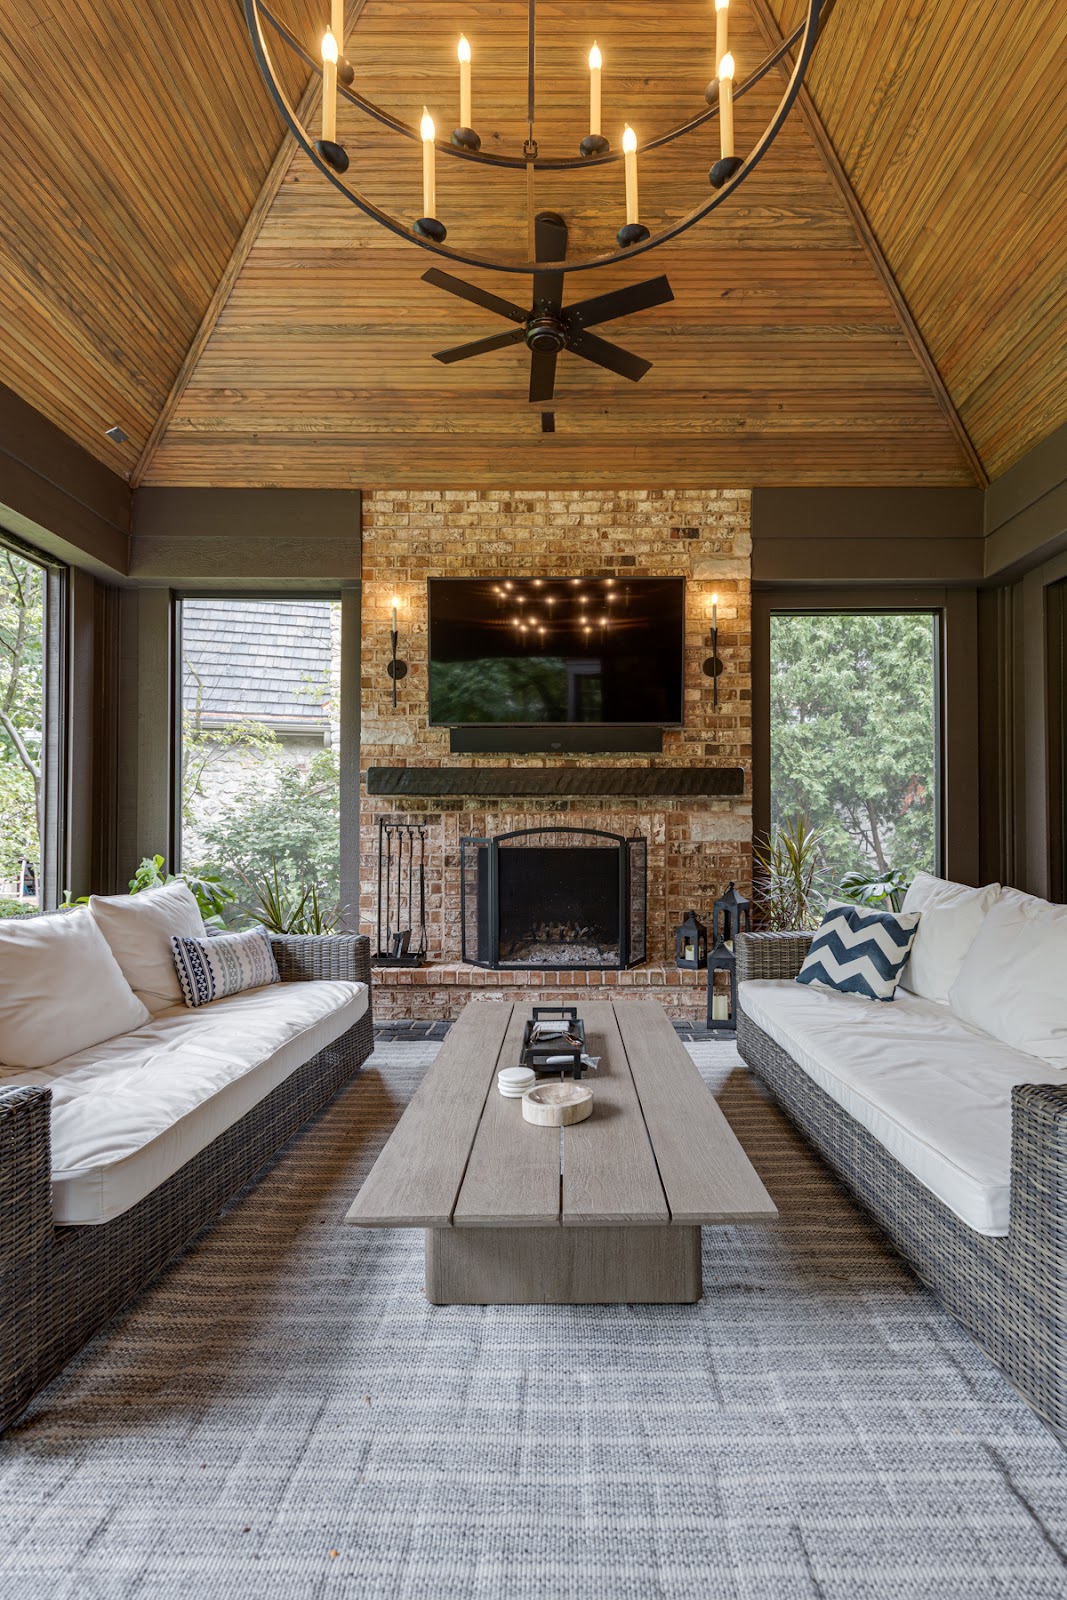 The natural wood beaded vaulted ceilings and wheel chandelier make a grand yet cozy statement.